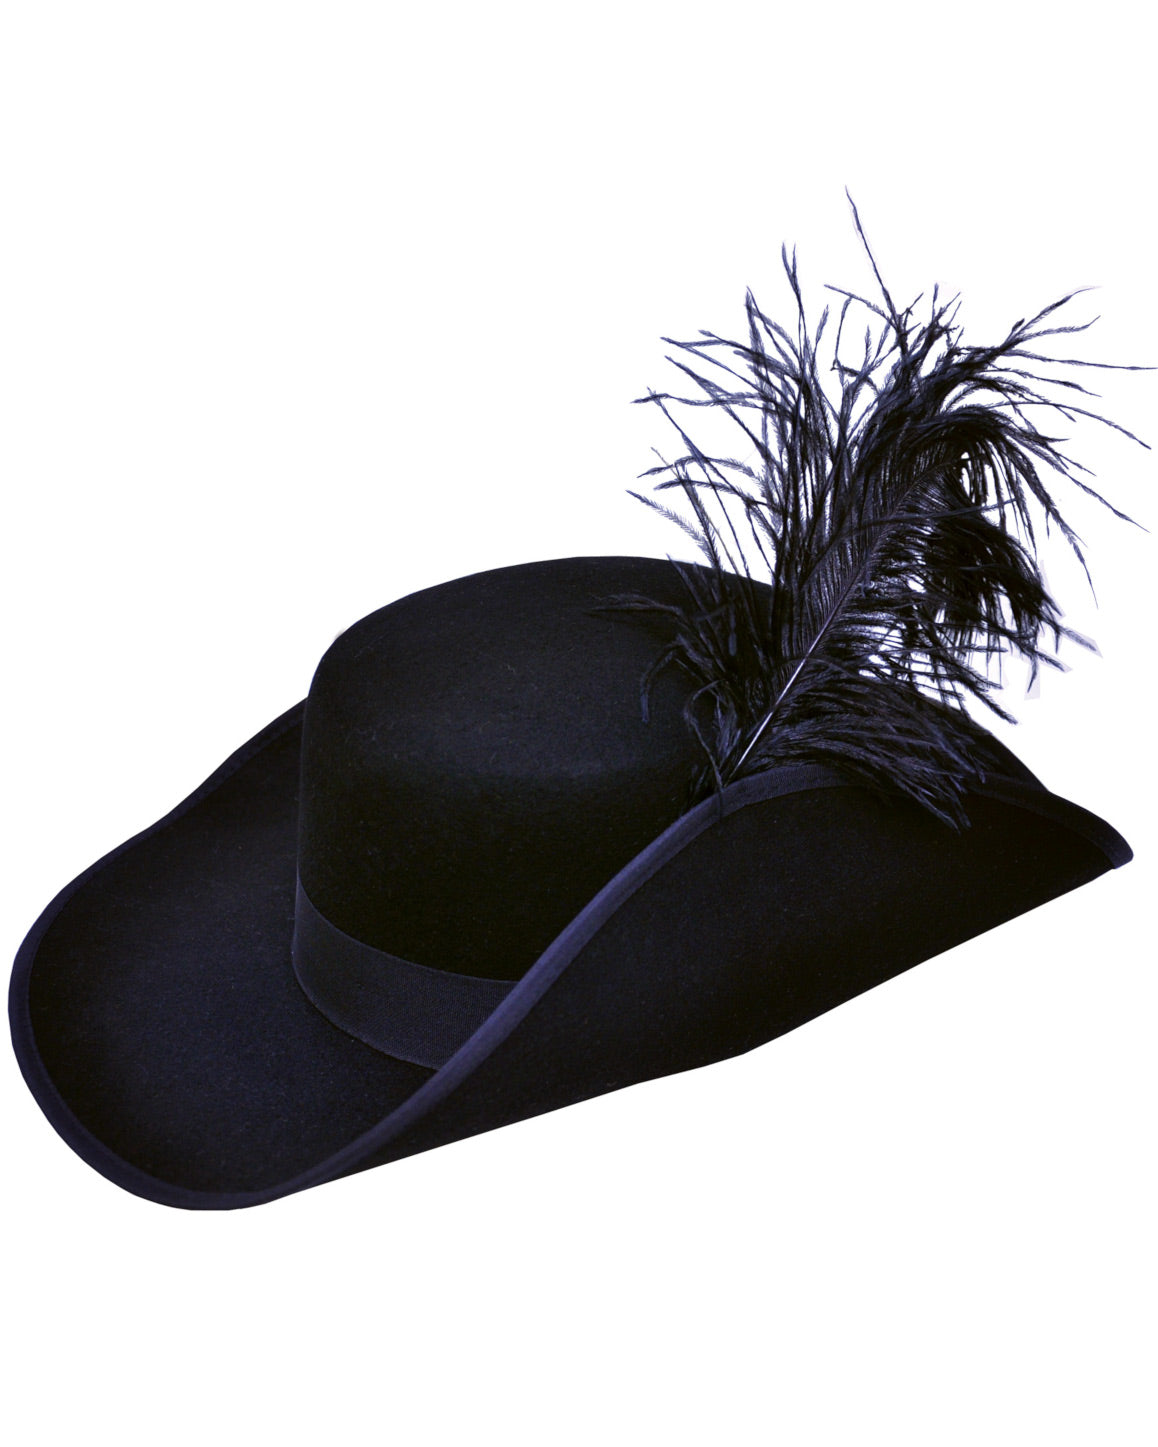 Wide Brim Leather Cavalier Hat Black With Large Feather Plume